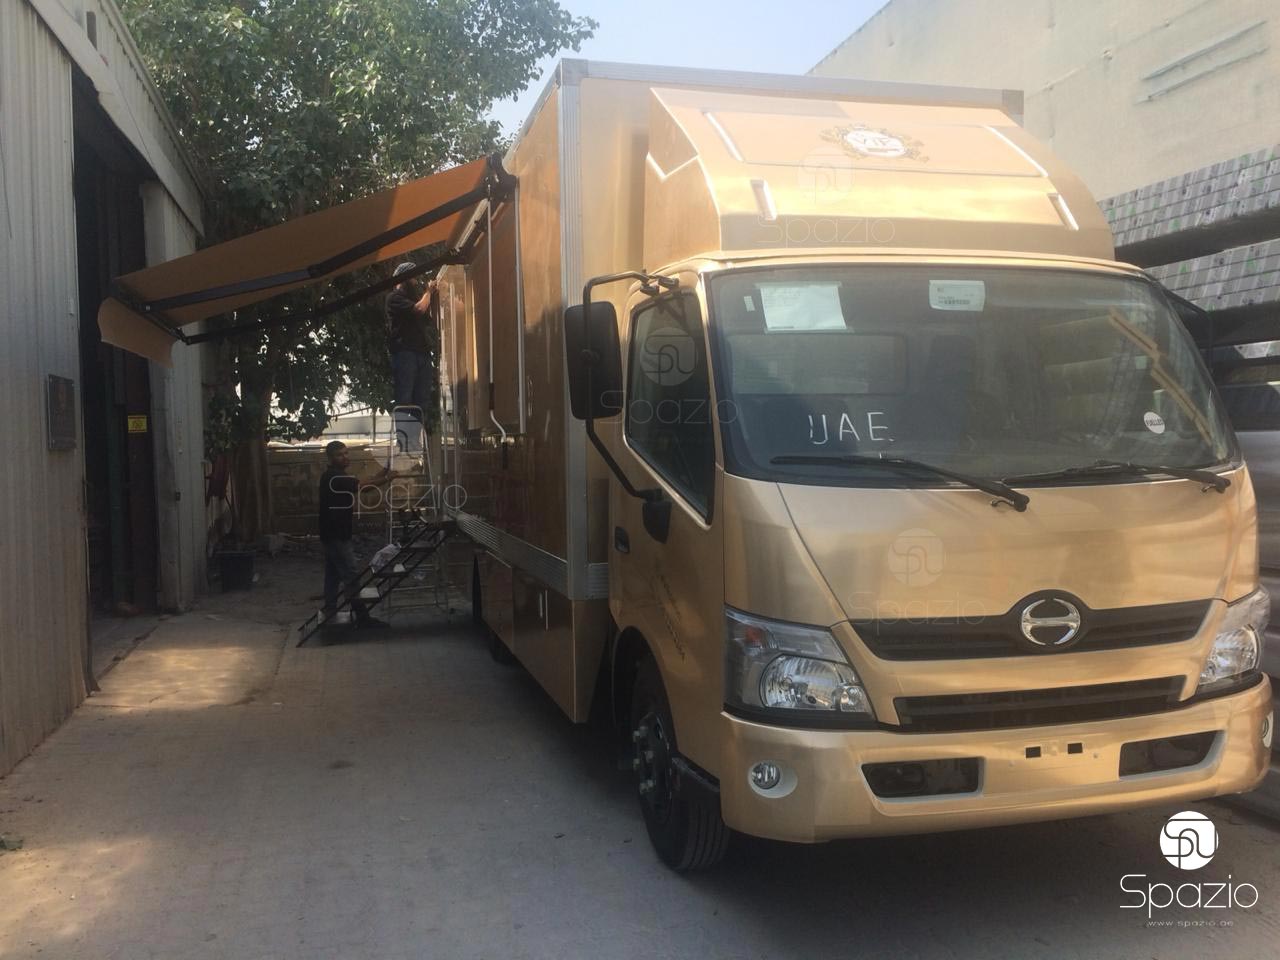 Luxury gold colored vehicle for hairdresser business in UAE.